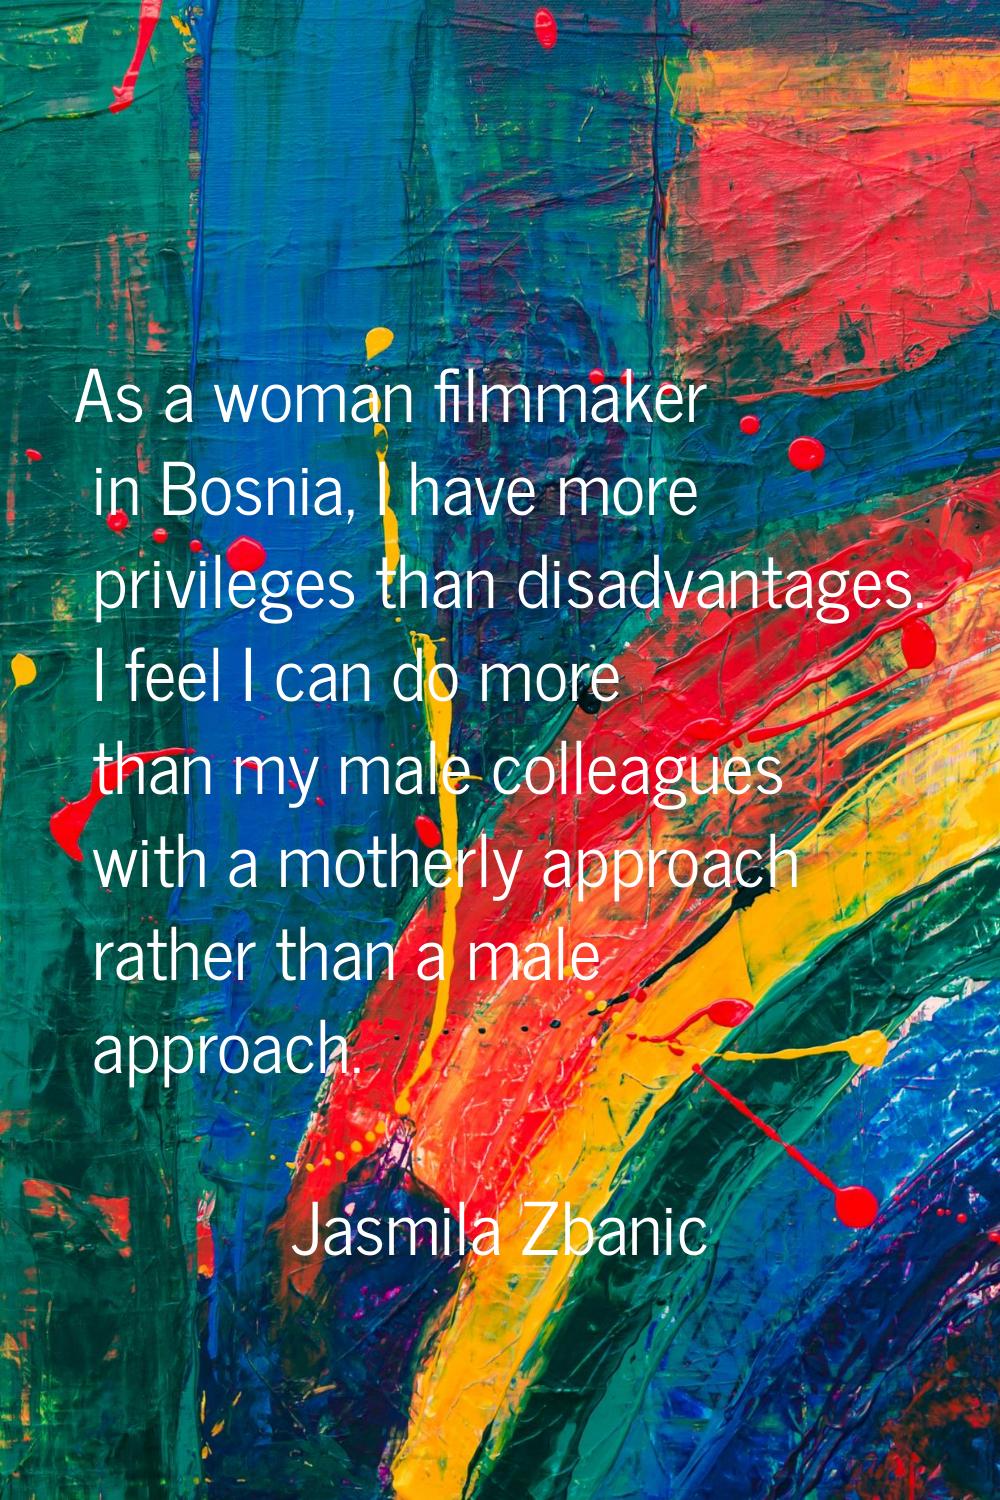 As a woman filmmaker in Bosnia, I have more privileges than disadvantages. I feel I can do more tha